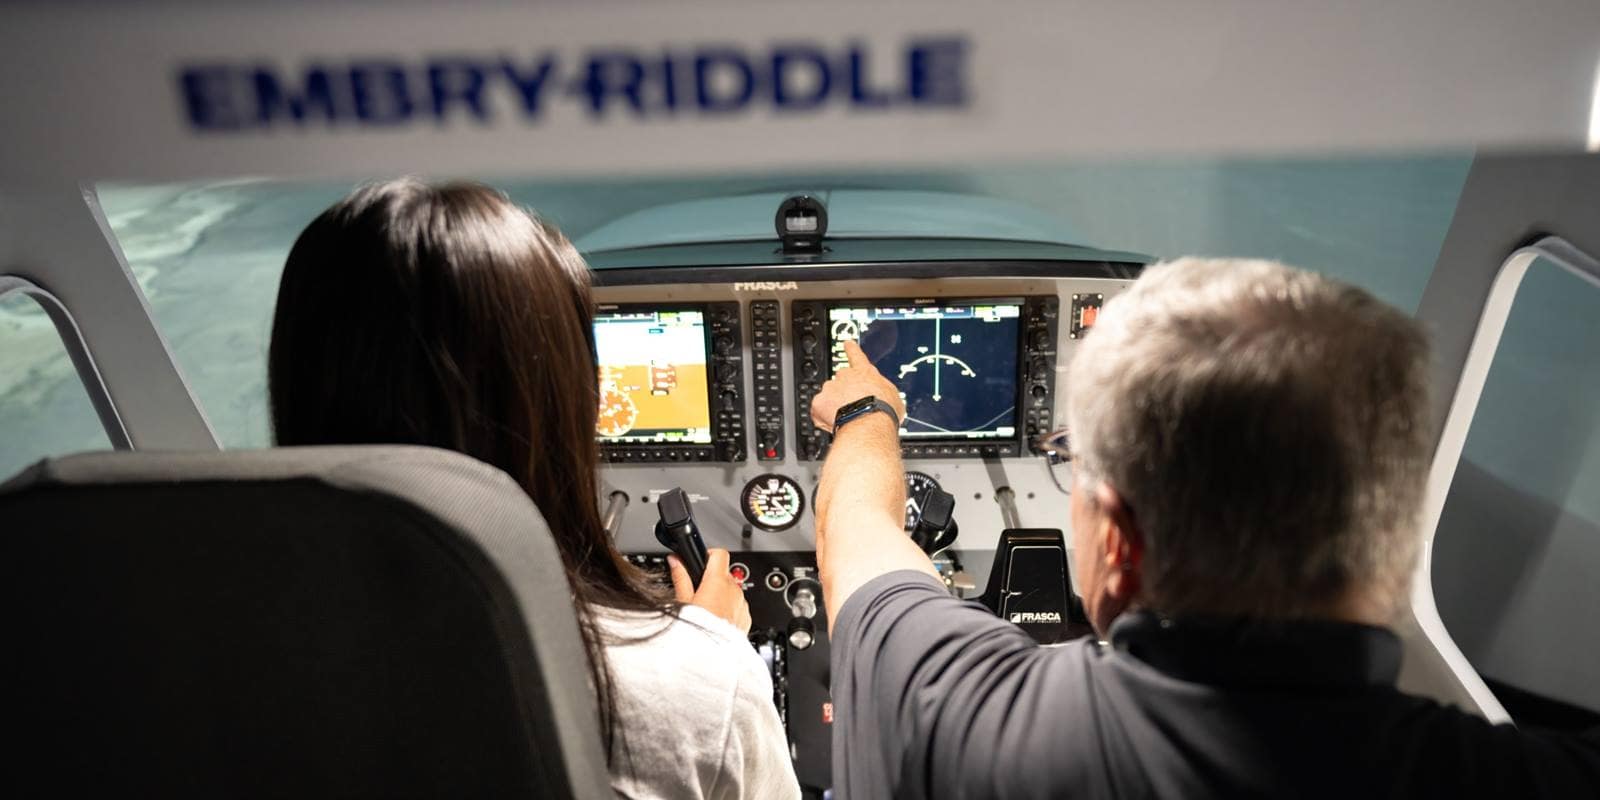 Embry-Riddle graduate focused on flight safety techniques. 